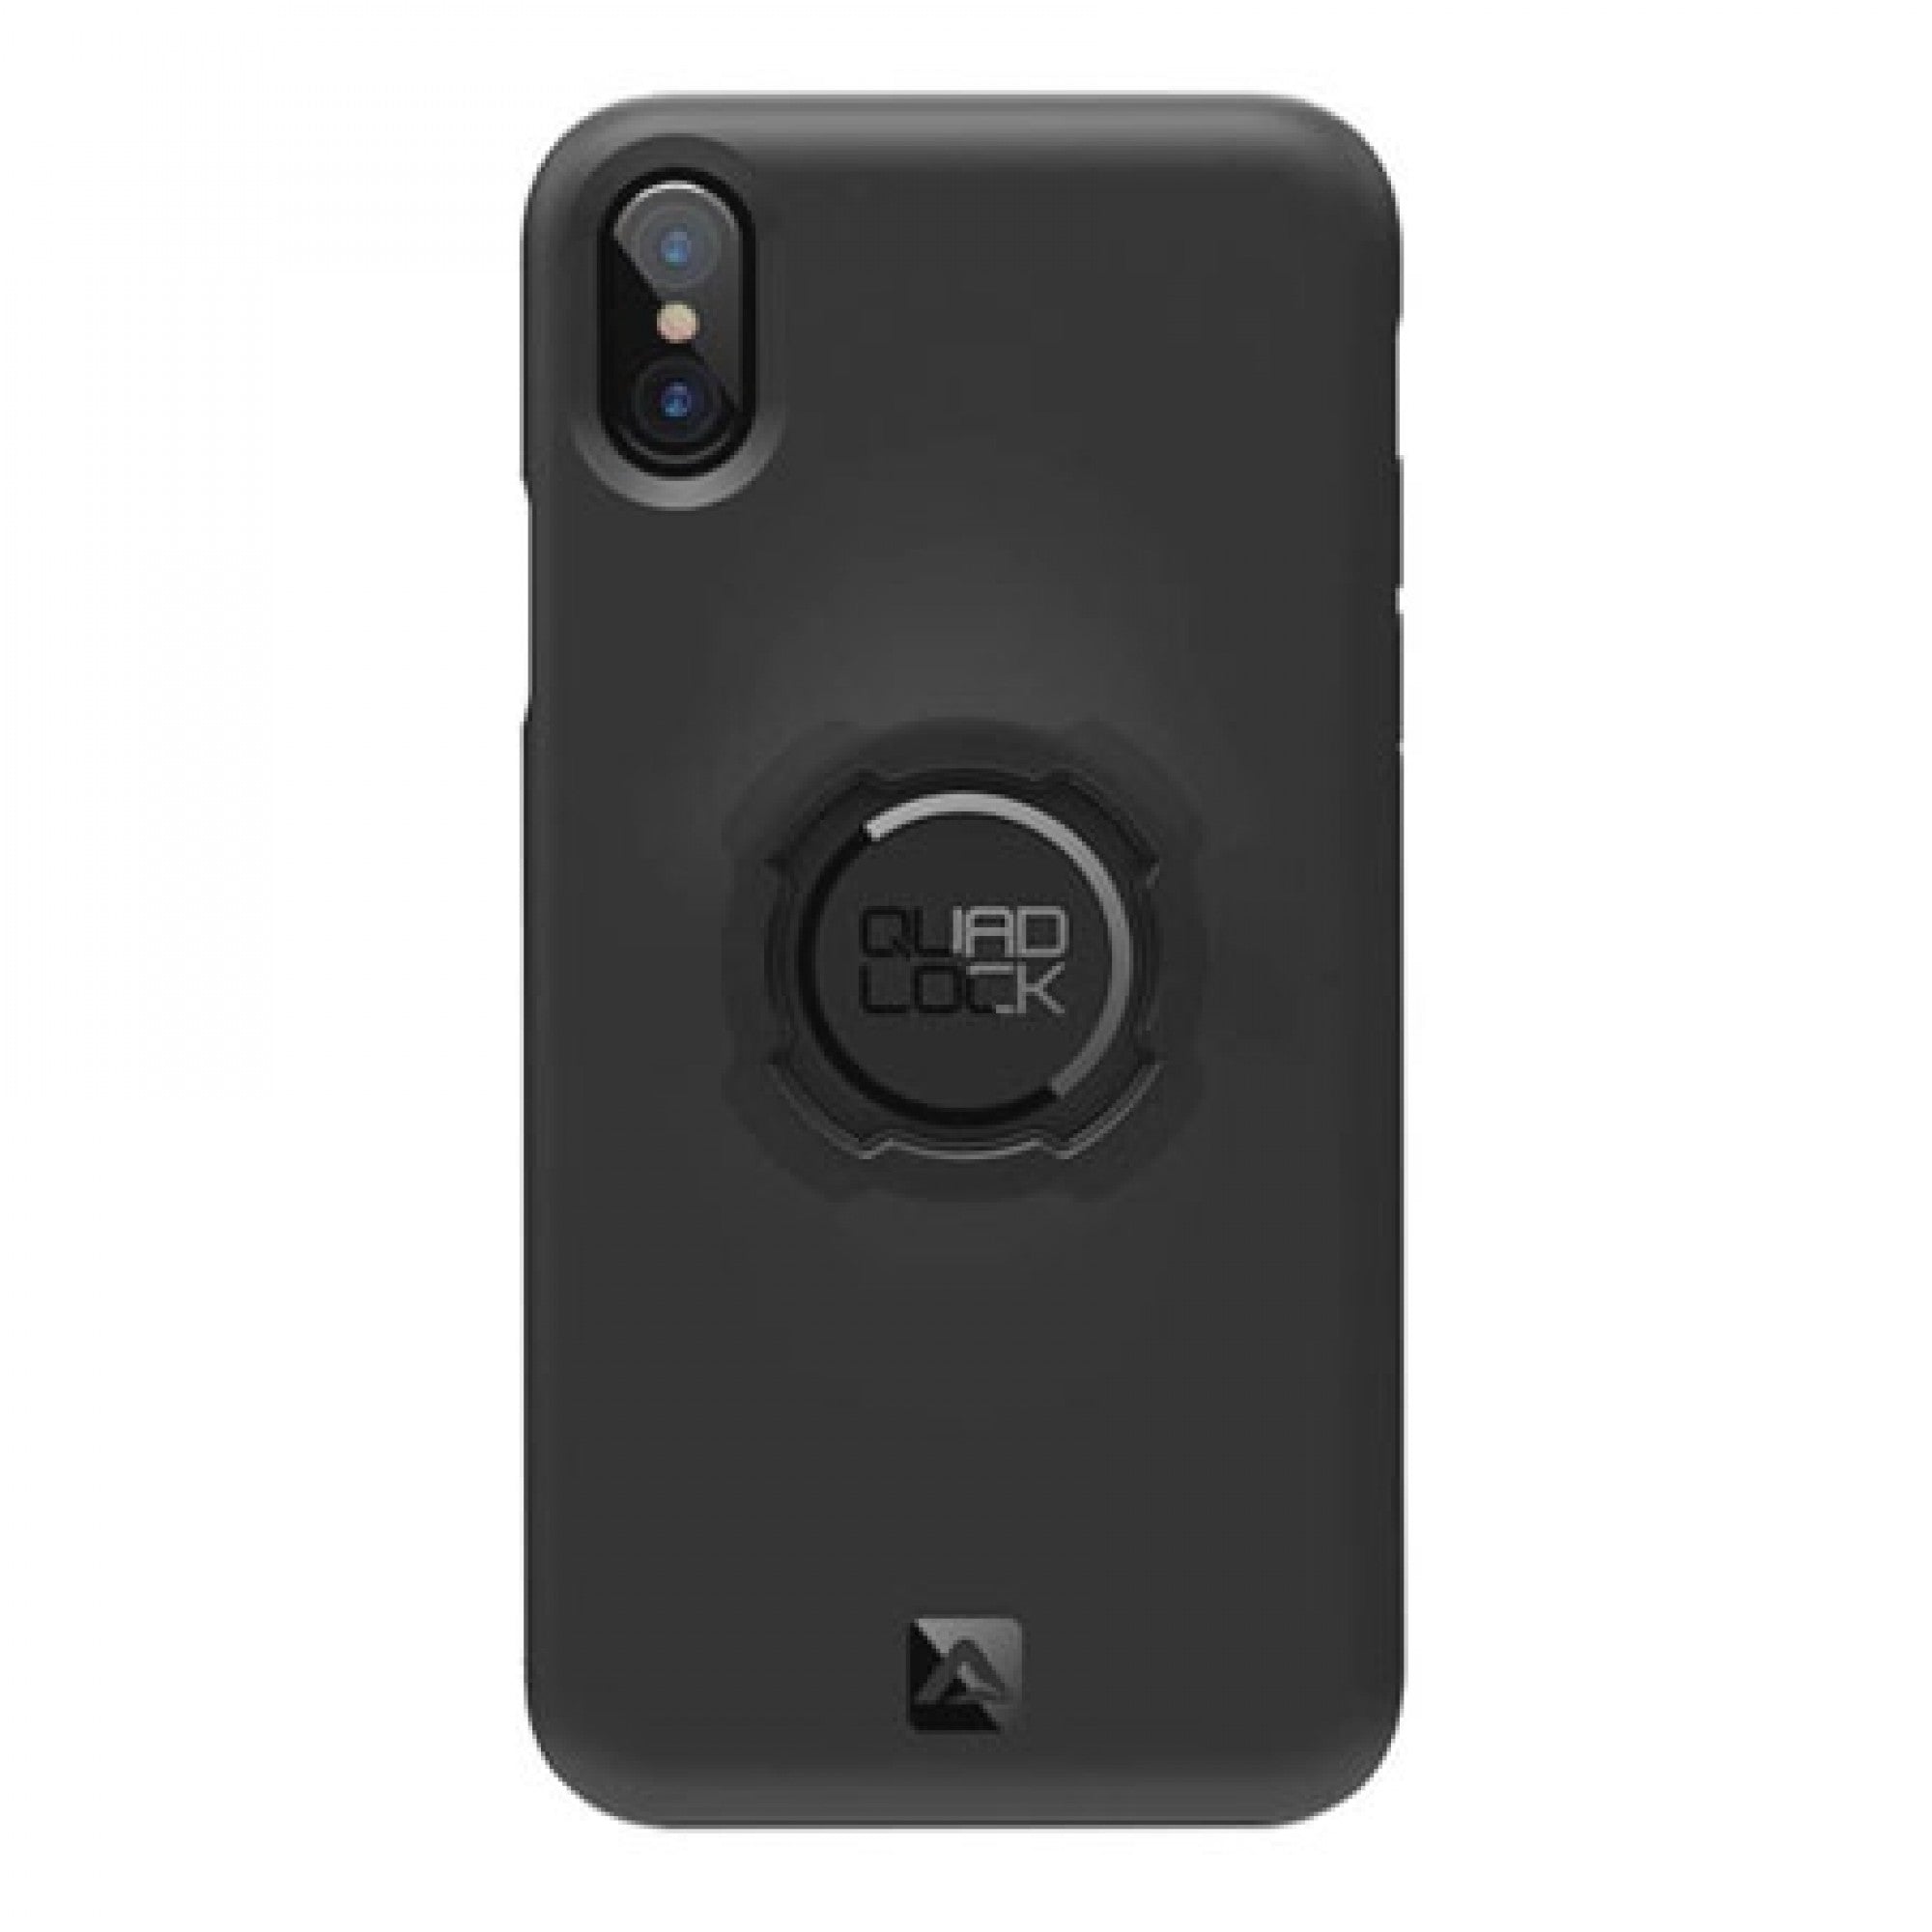 Quad Lock iPhone X Max Case | Phone Cases and Mounts | Bicycle Superstore